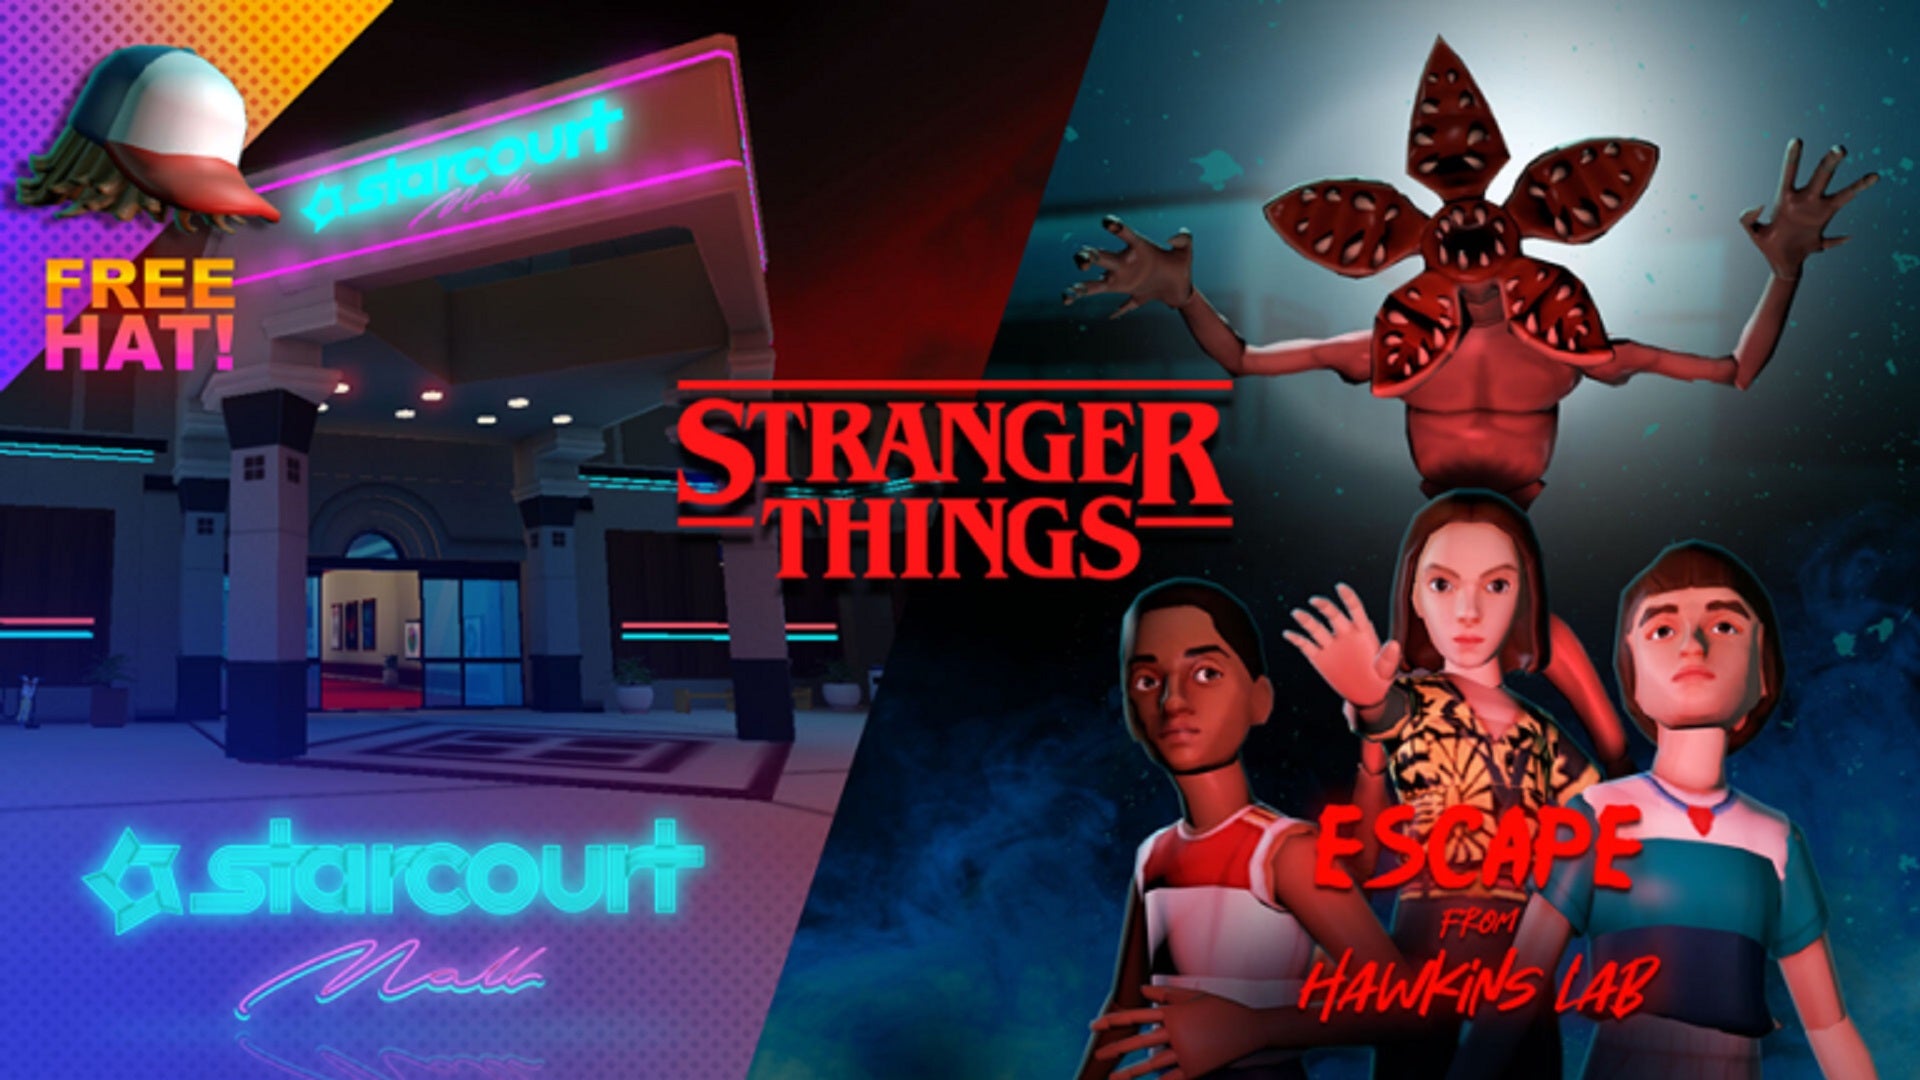 A split image: on the left, the entrance to Starcourt Mall; on the right, a Demogorgon menacing characters Eleven, Lucas, and Will. Text in image reads "Stranger Things: Escape from Hawkins Lab".